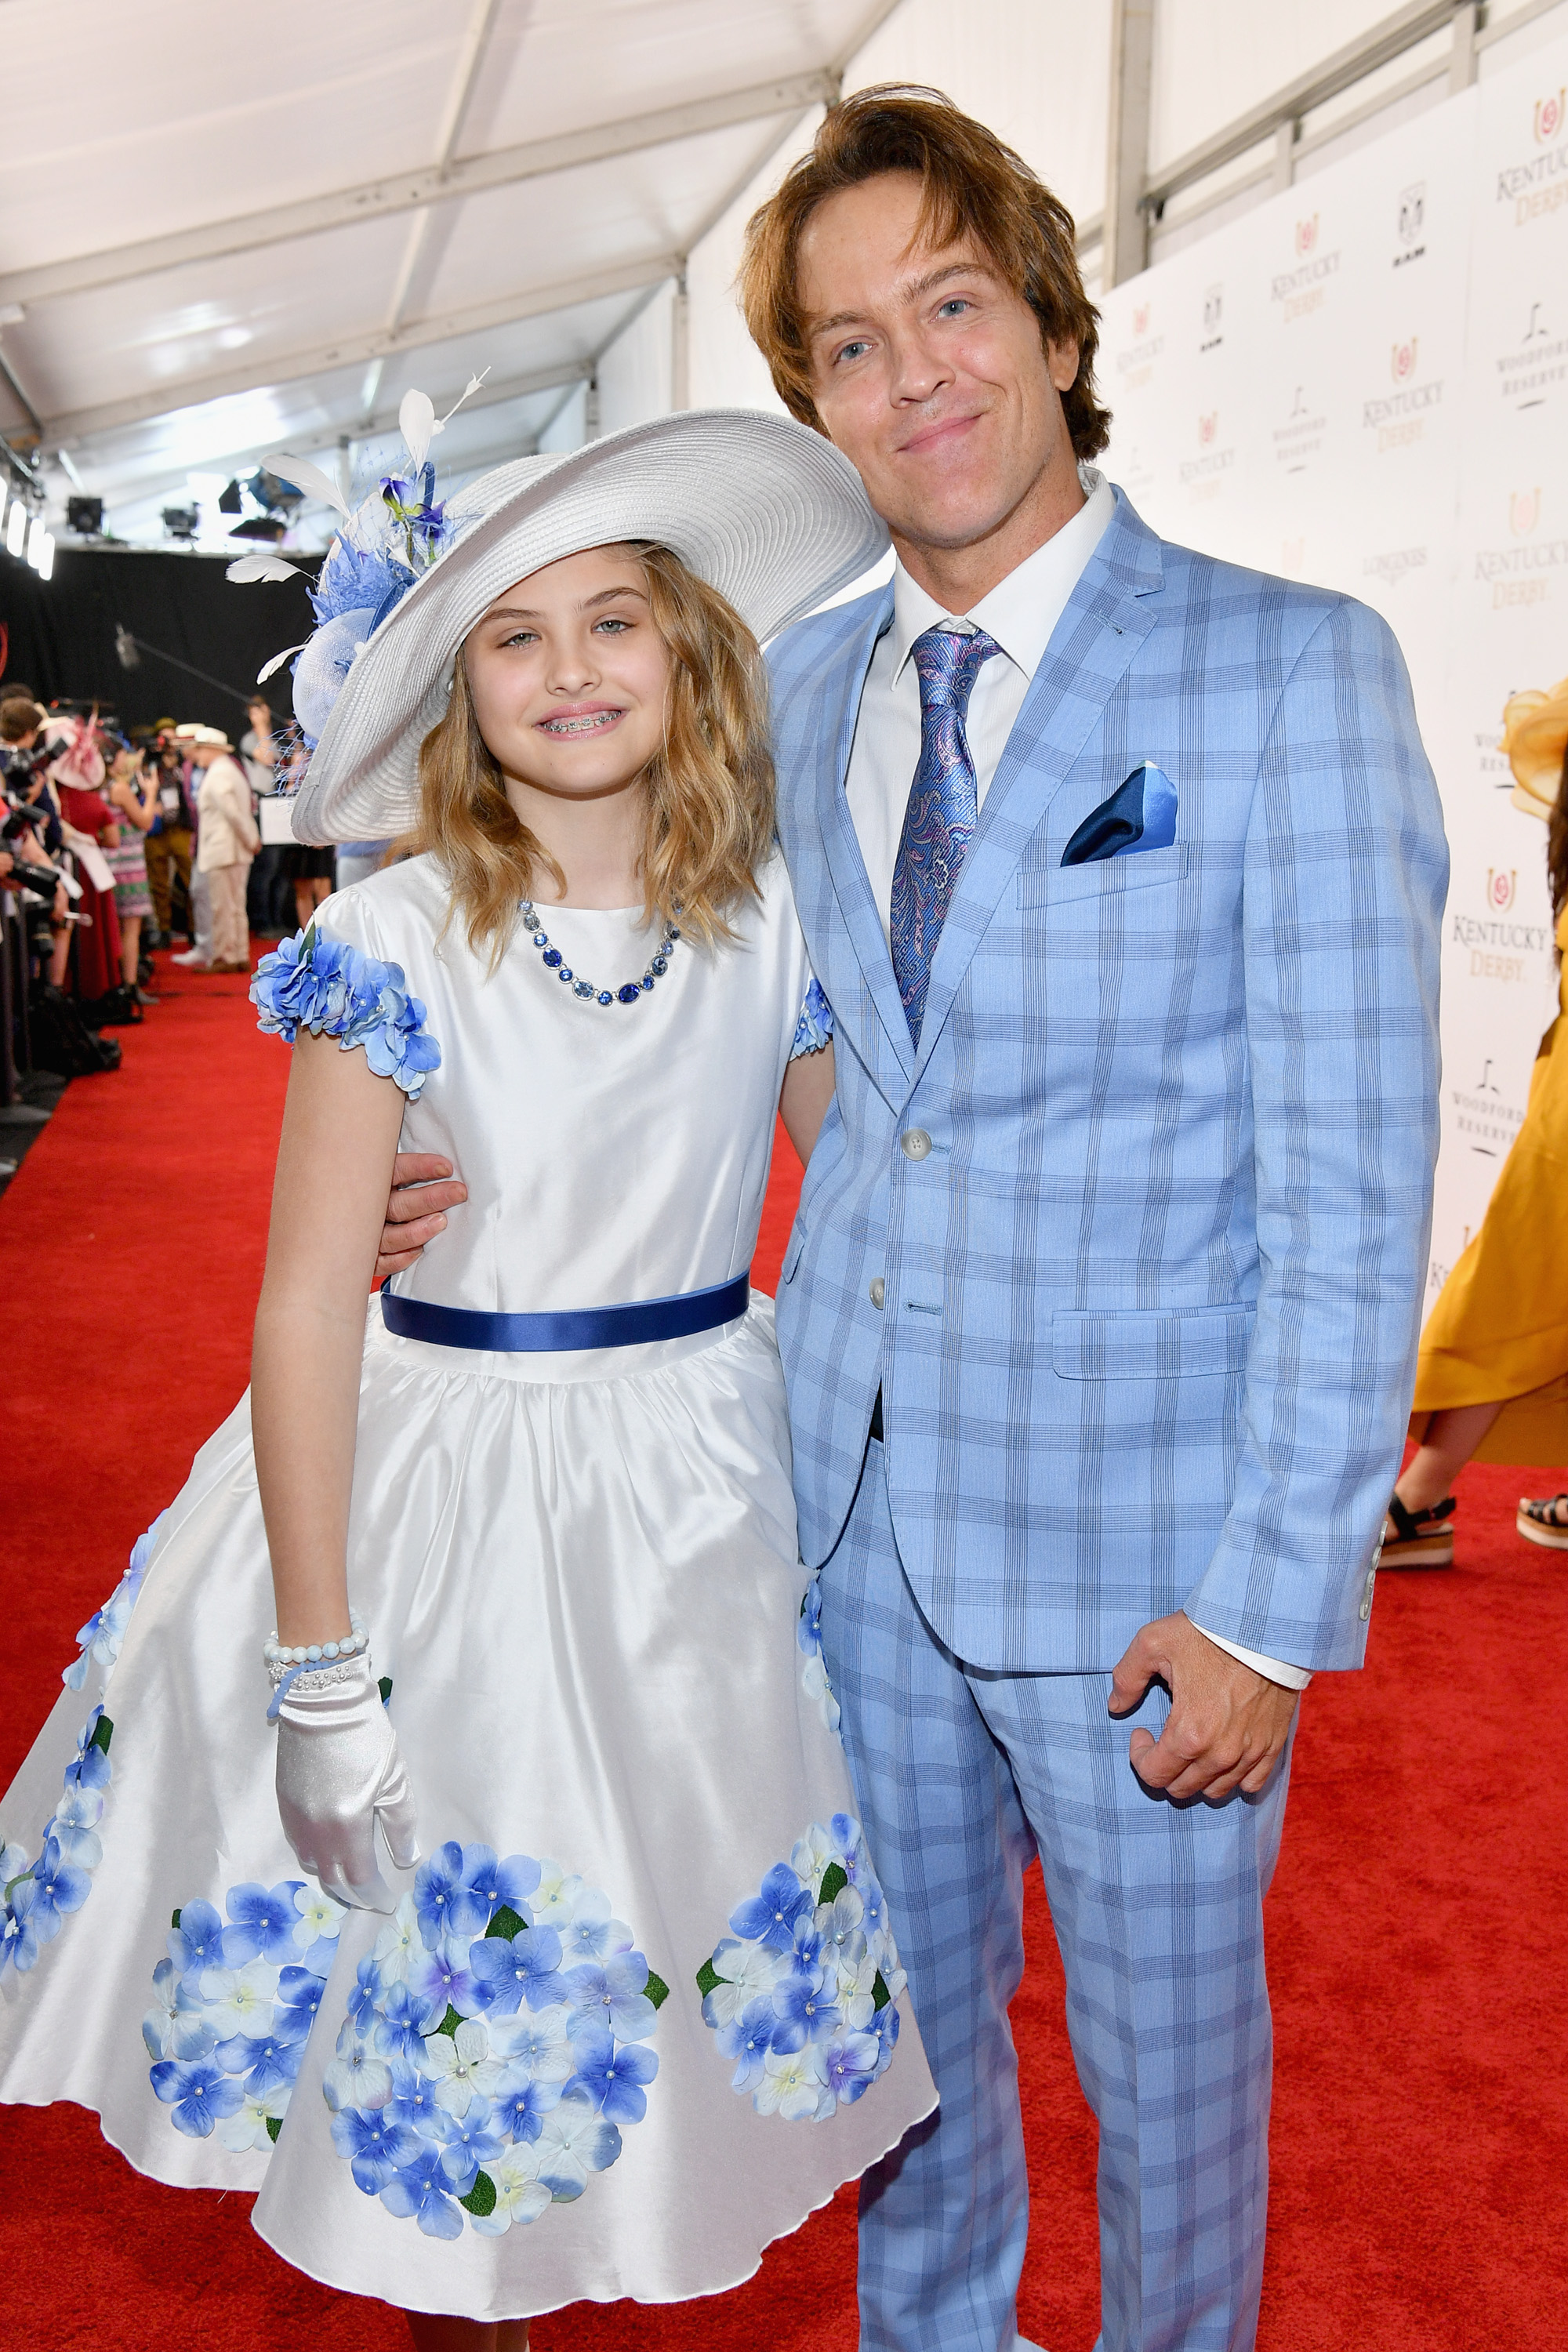 Larry Birkhead and Dannielynn Birkhead in Louisville, Kentucky for the 141st Kentucky Derby at Churchill Downs in 2018 | Source: Getty Images